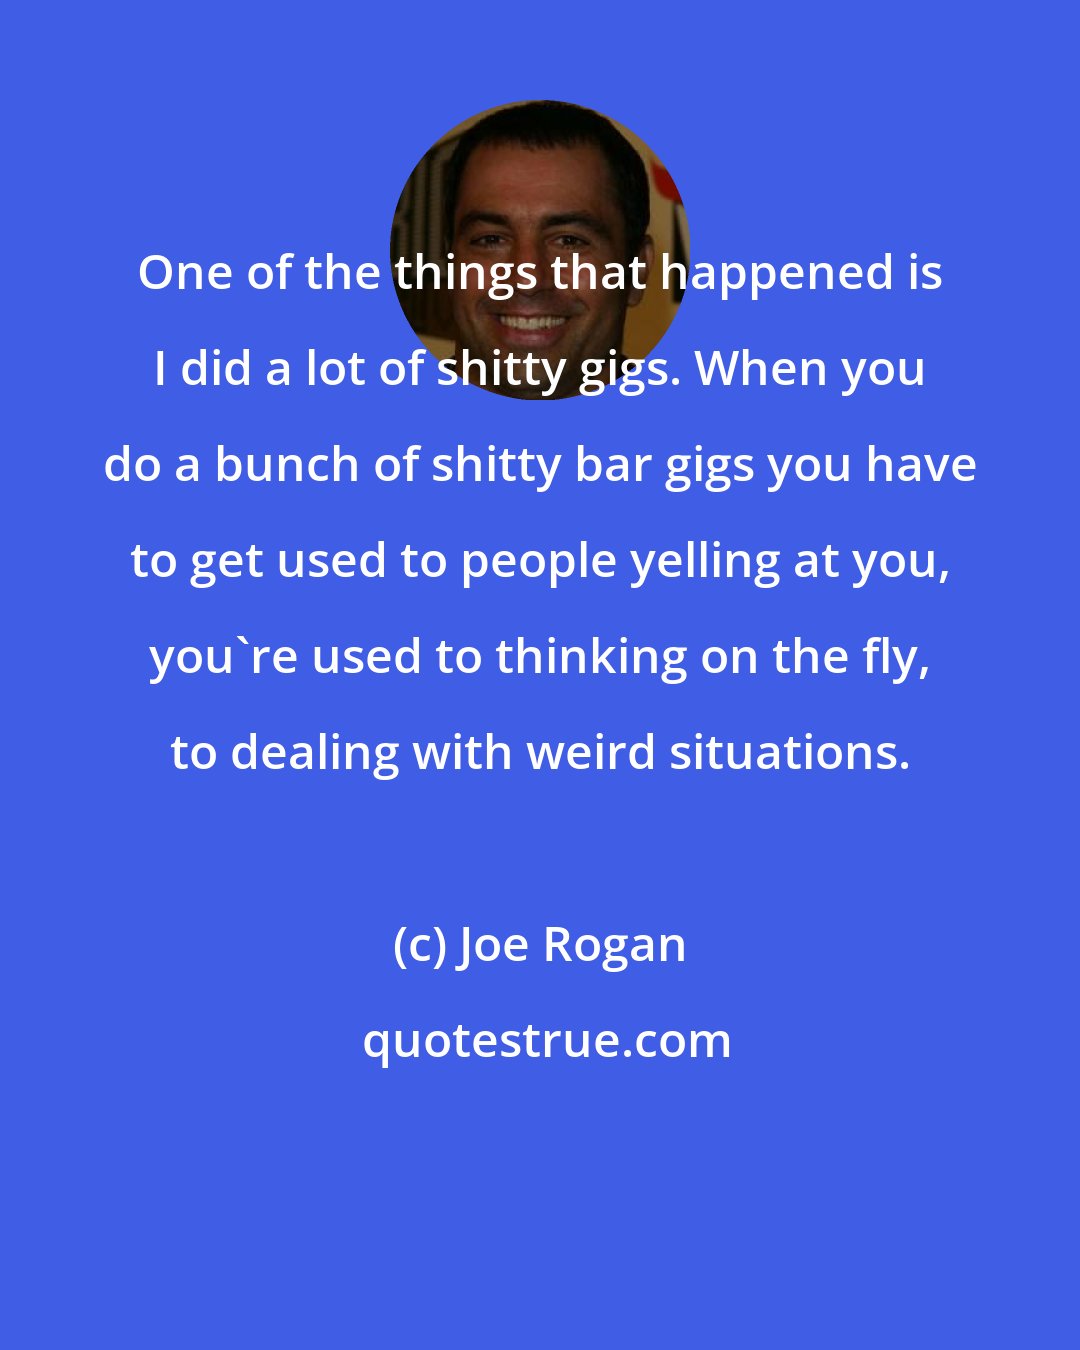 Joe Rogan: One of the things that happened is I did a lot of shitty gigs. When you do a bunch of shitty bar gigs you have to get used to people yelling at you, you're used to thinking on the fly, to dealing with weird situations.